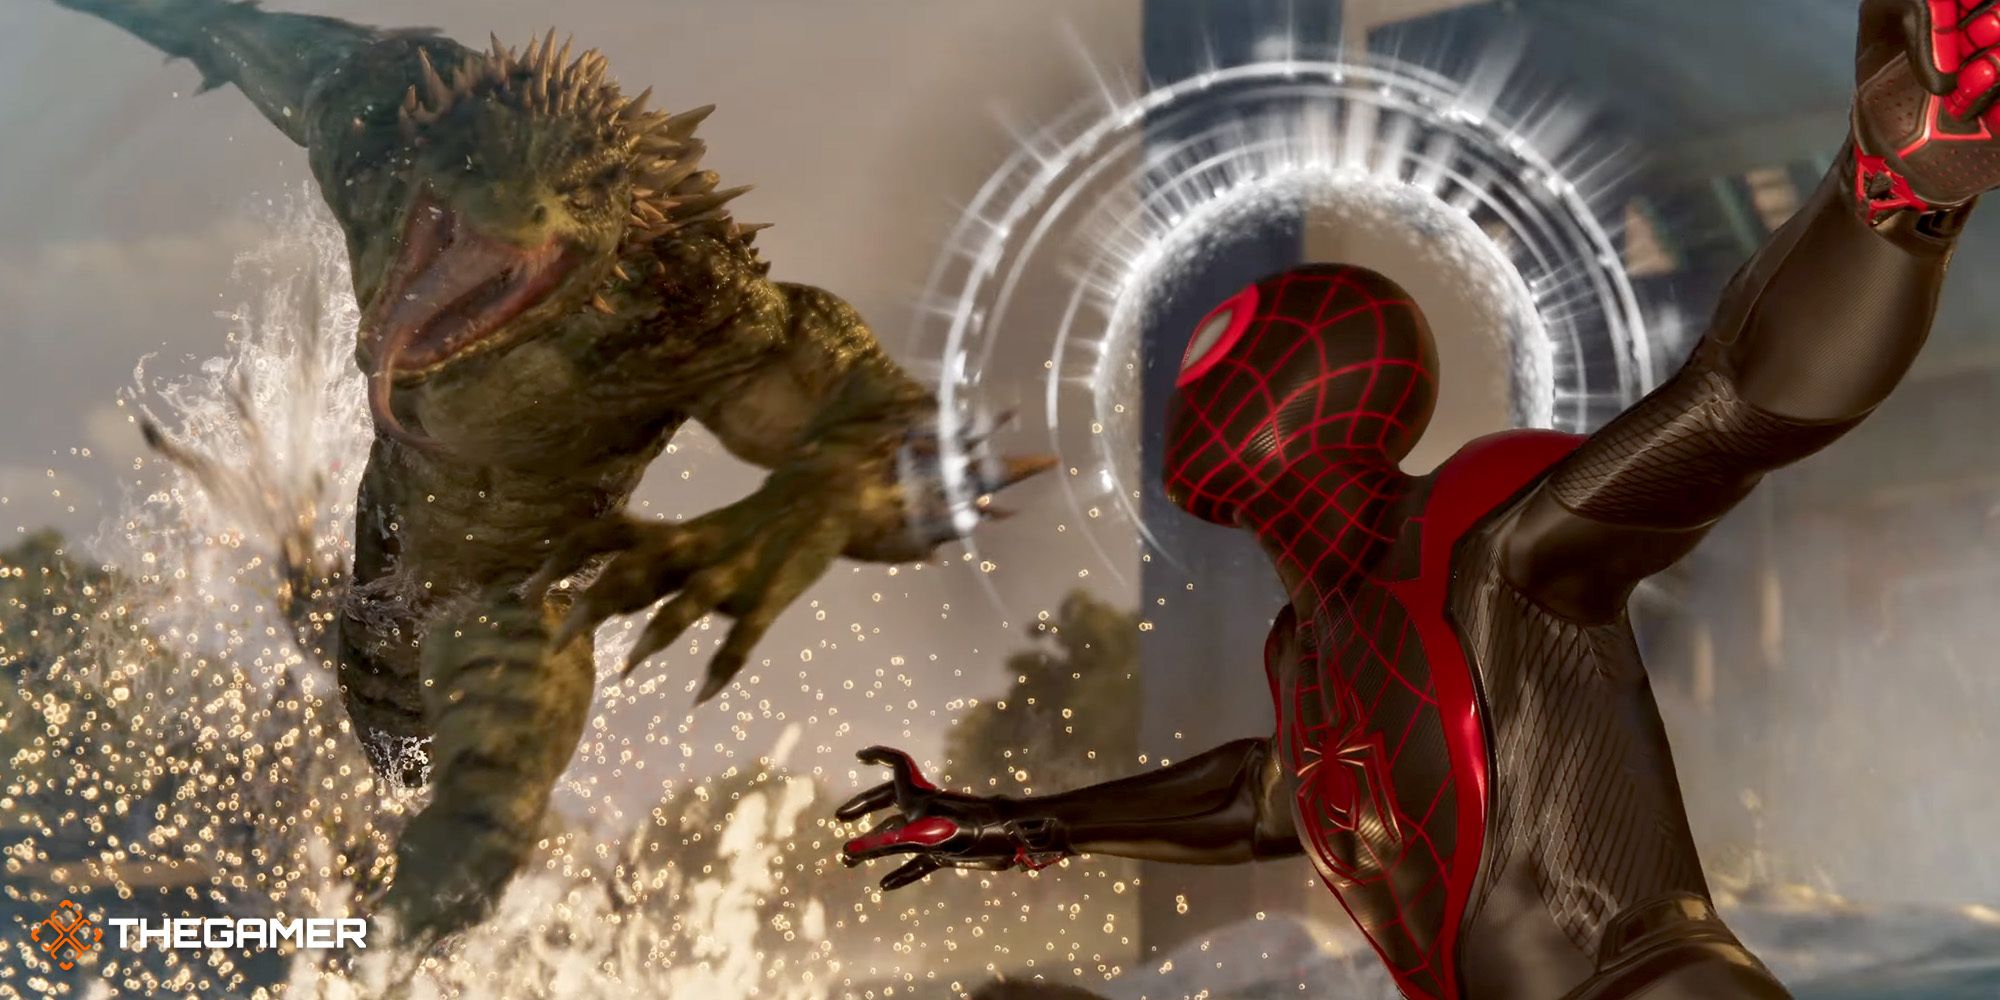 Miles Morales as Spider-Man facing off against the Lizard